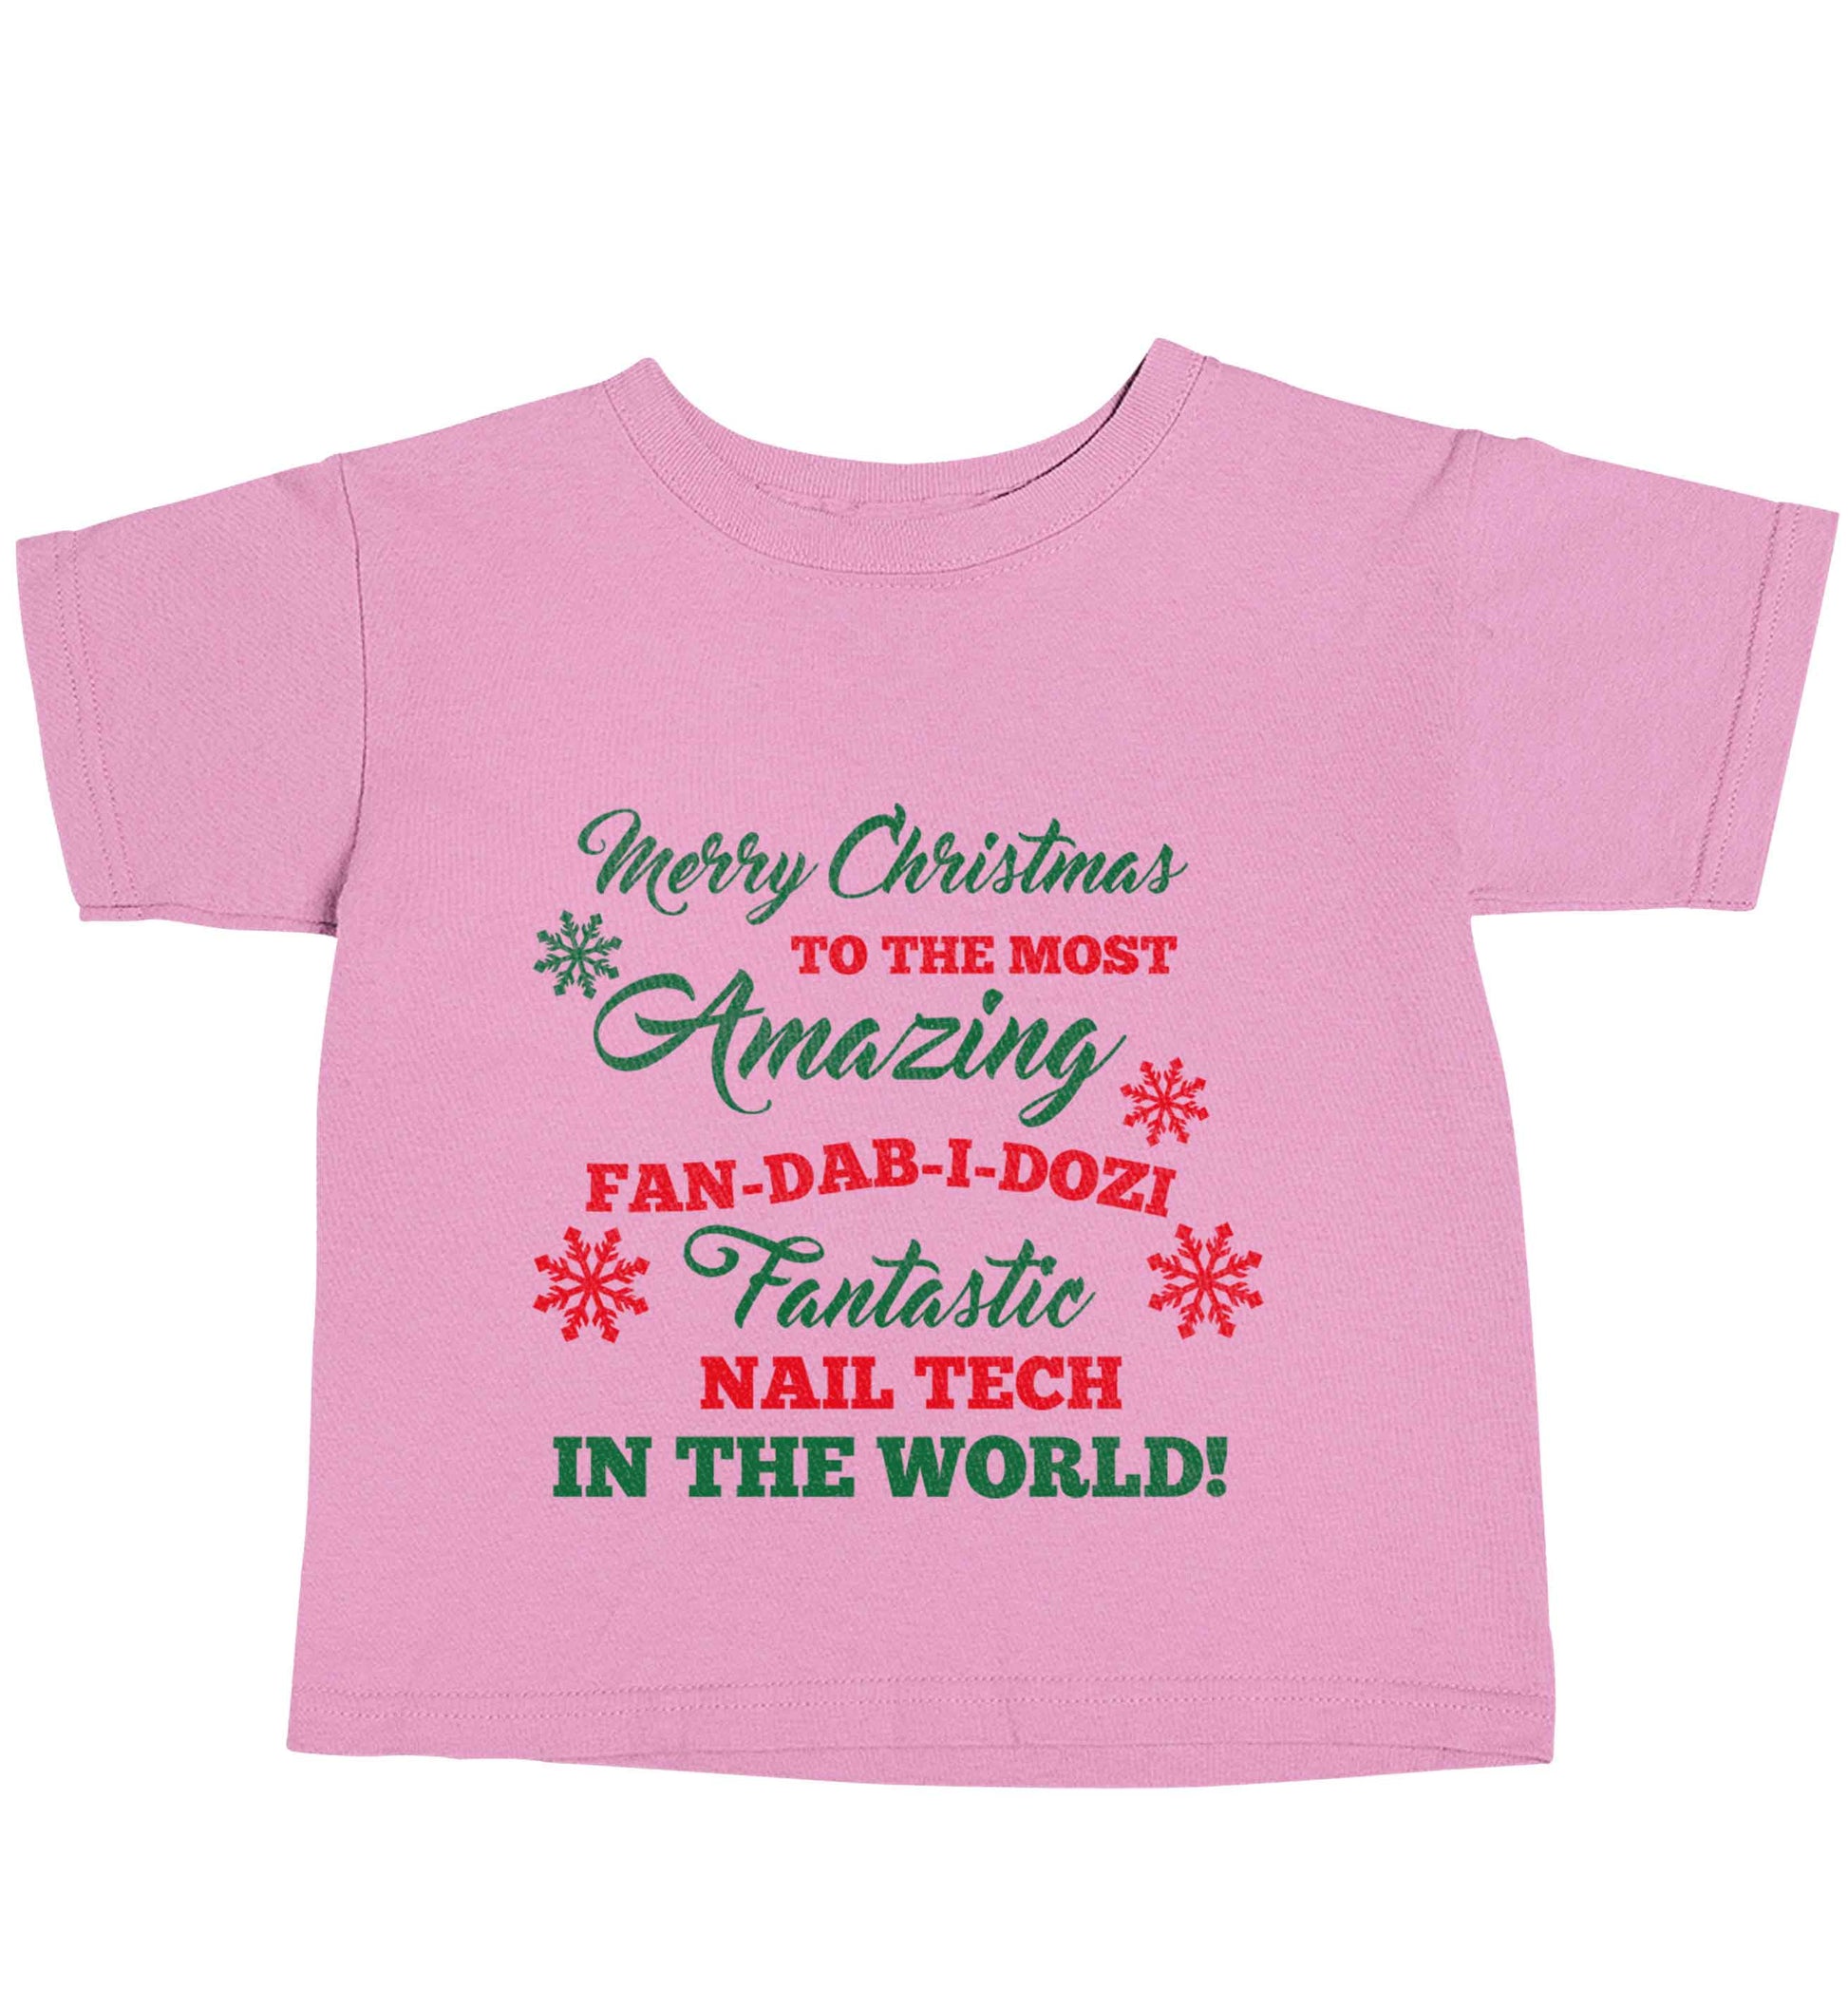 Merry Christmas to the most amazing fan-dab-i-dozi fantasic nail technician in the world light pink baby toddler Tshirt 2 Years